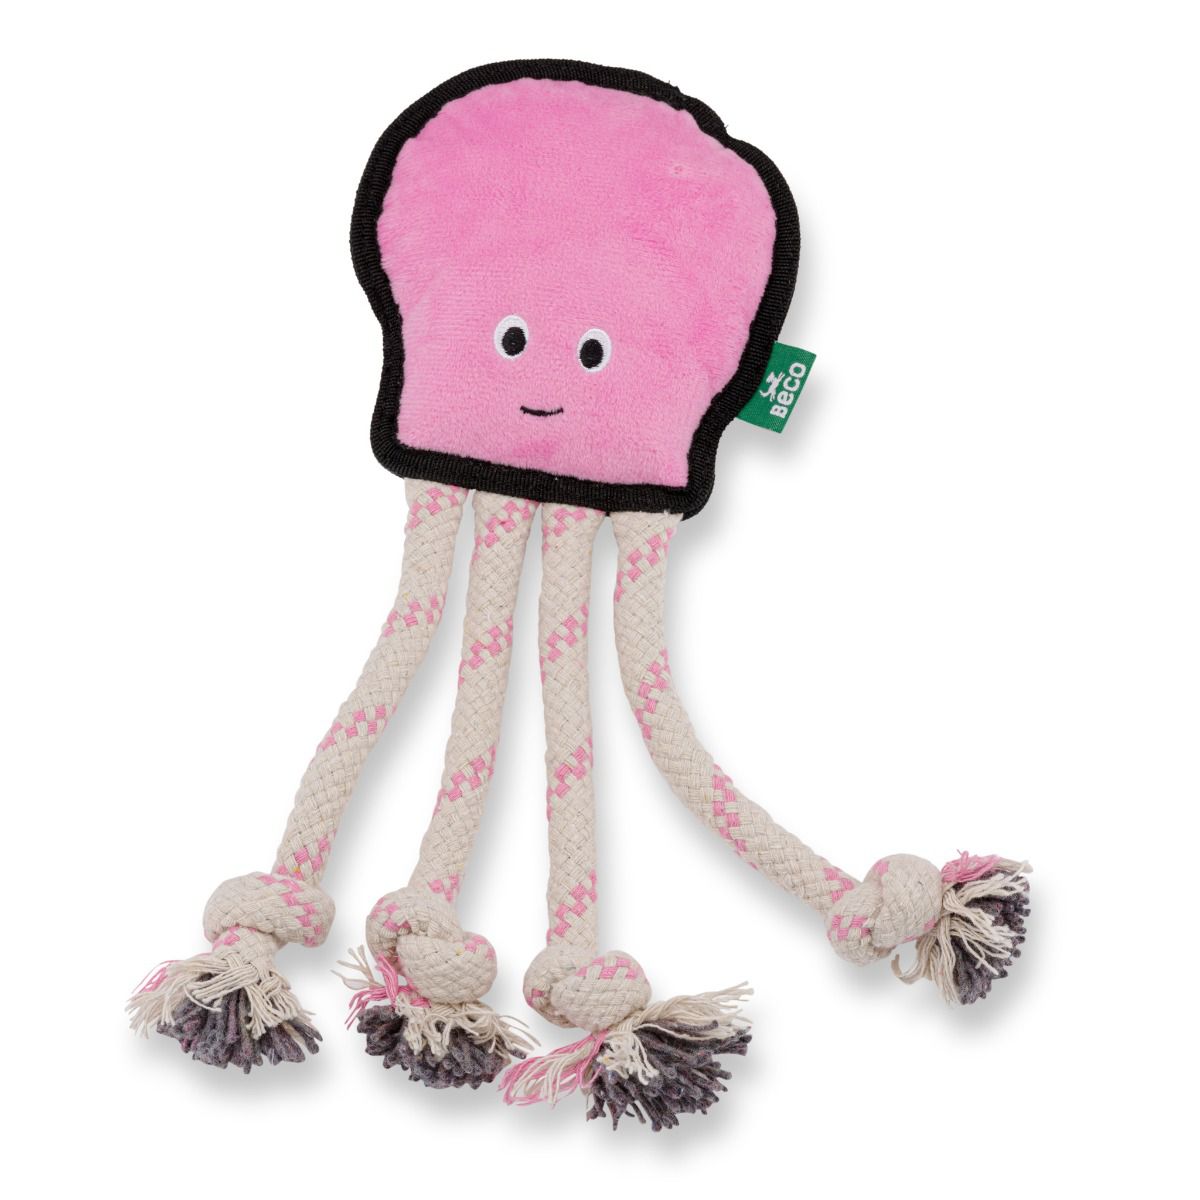 Afbeelding Knuffel Hond – Beco Plush Toy Octopus